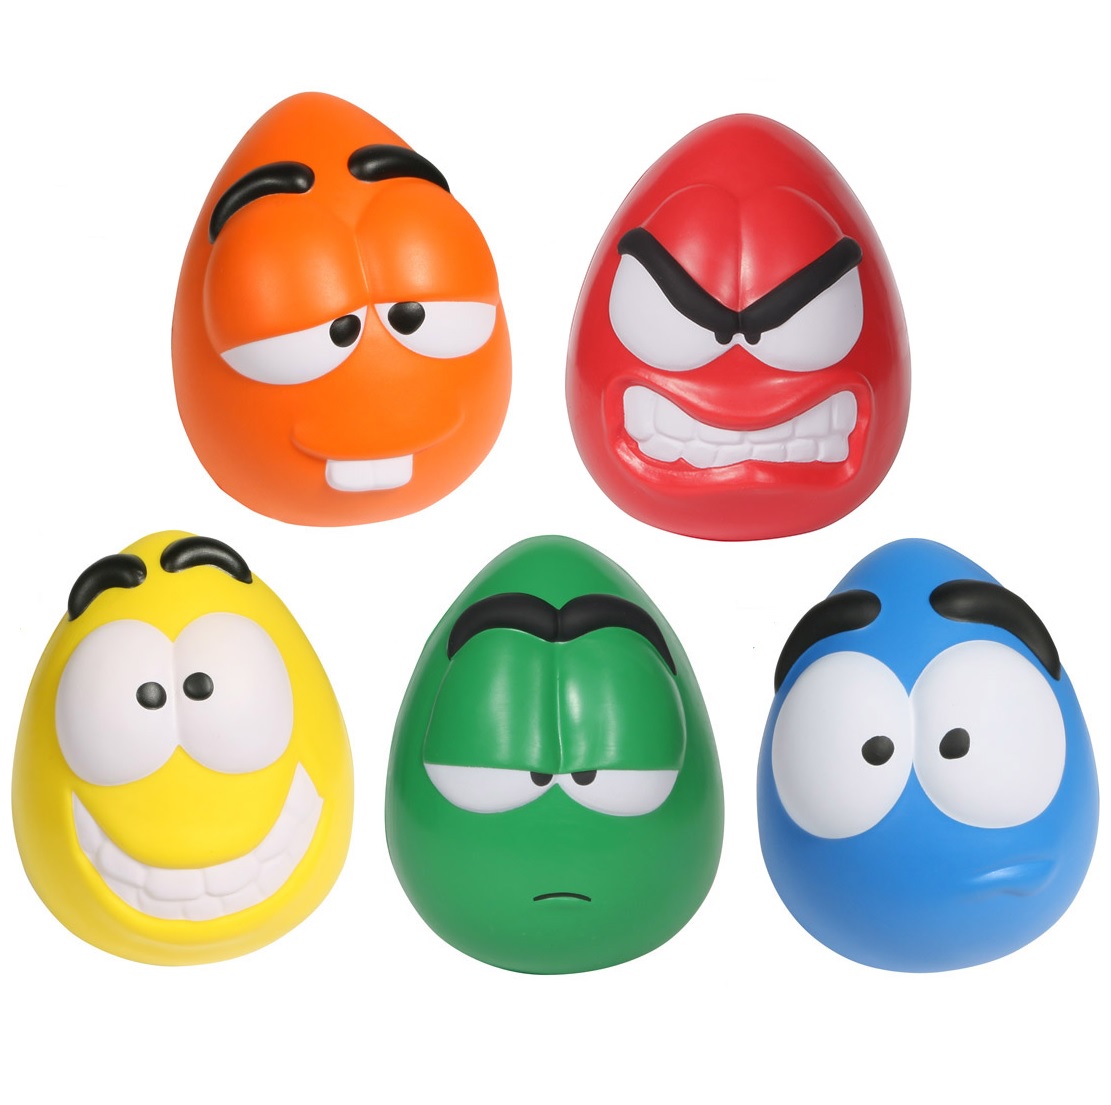 Mood Faces Wobbler Stress Relievers